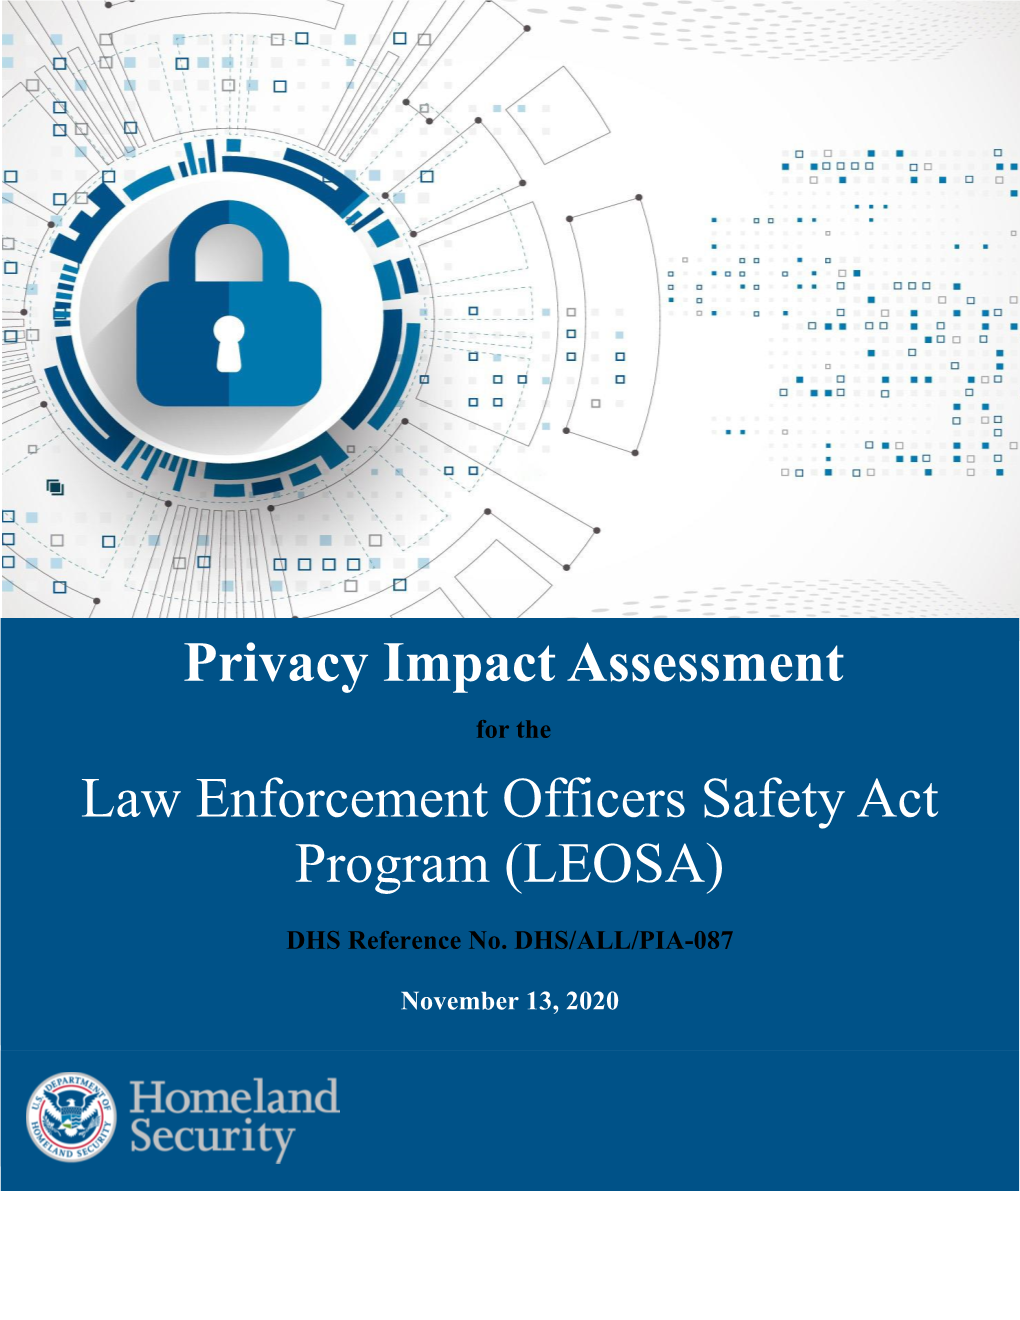 DHS/ALL/PIA-087 Law Enforcement Officers Safety Act Program (LEOSA)